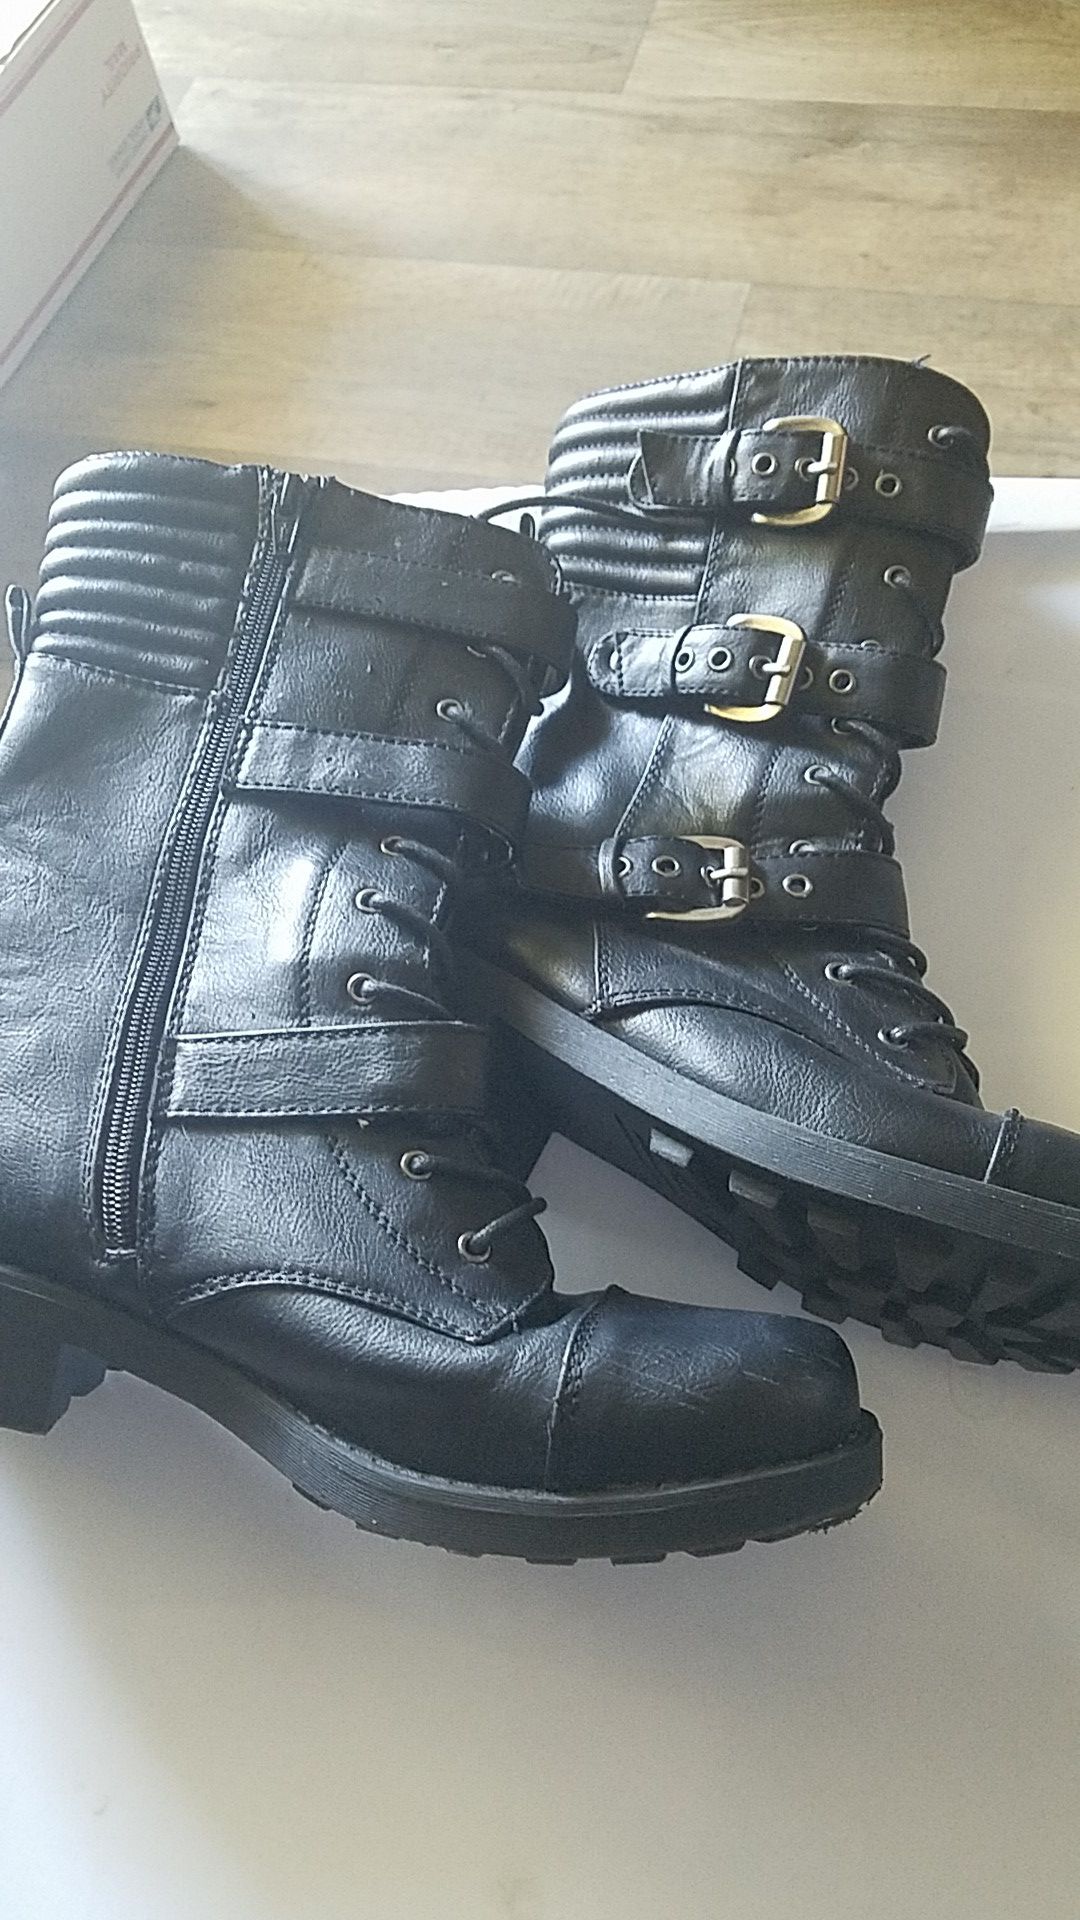 Women's size 9 boots